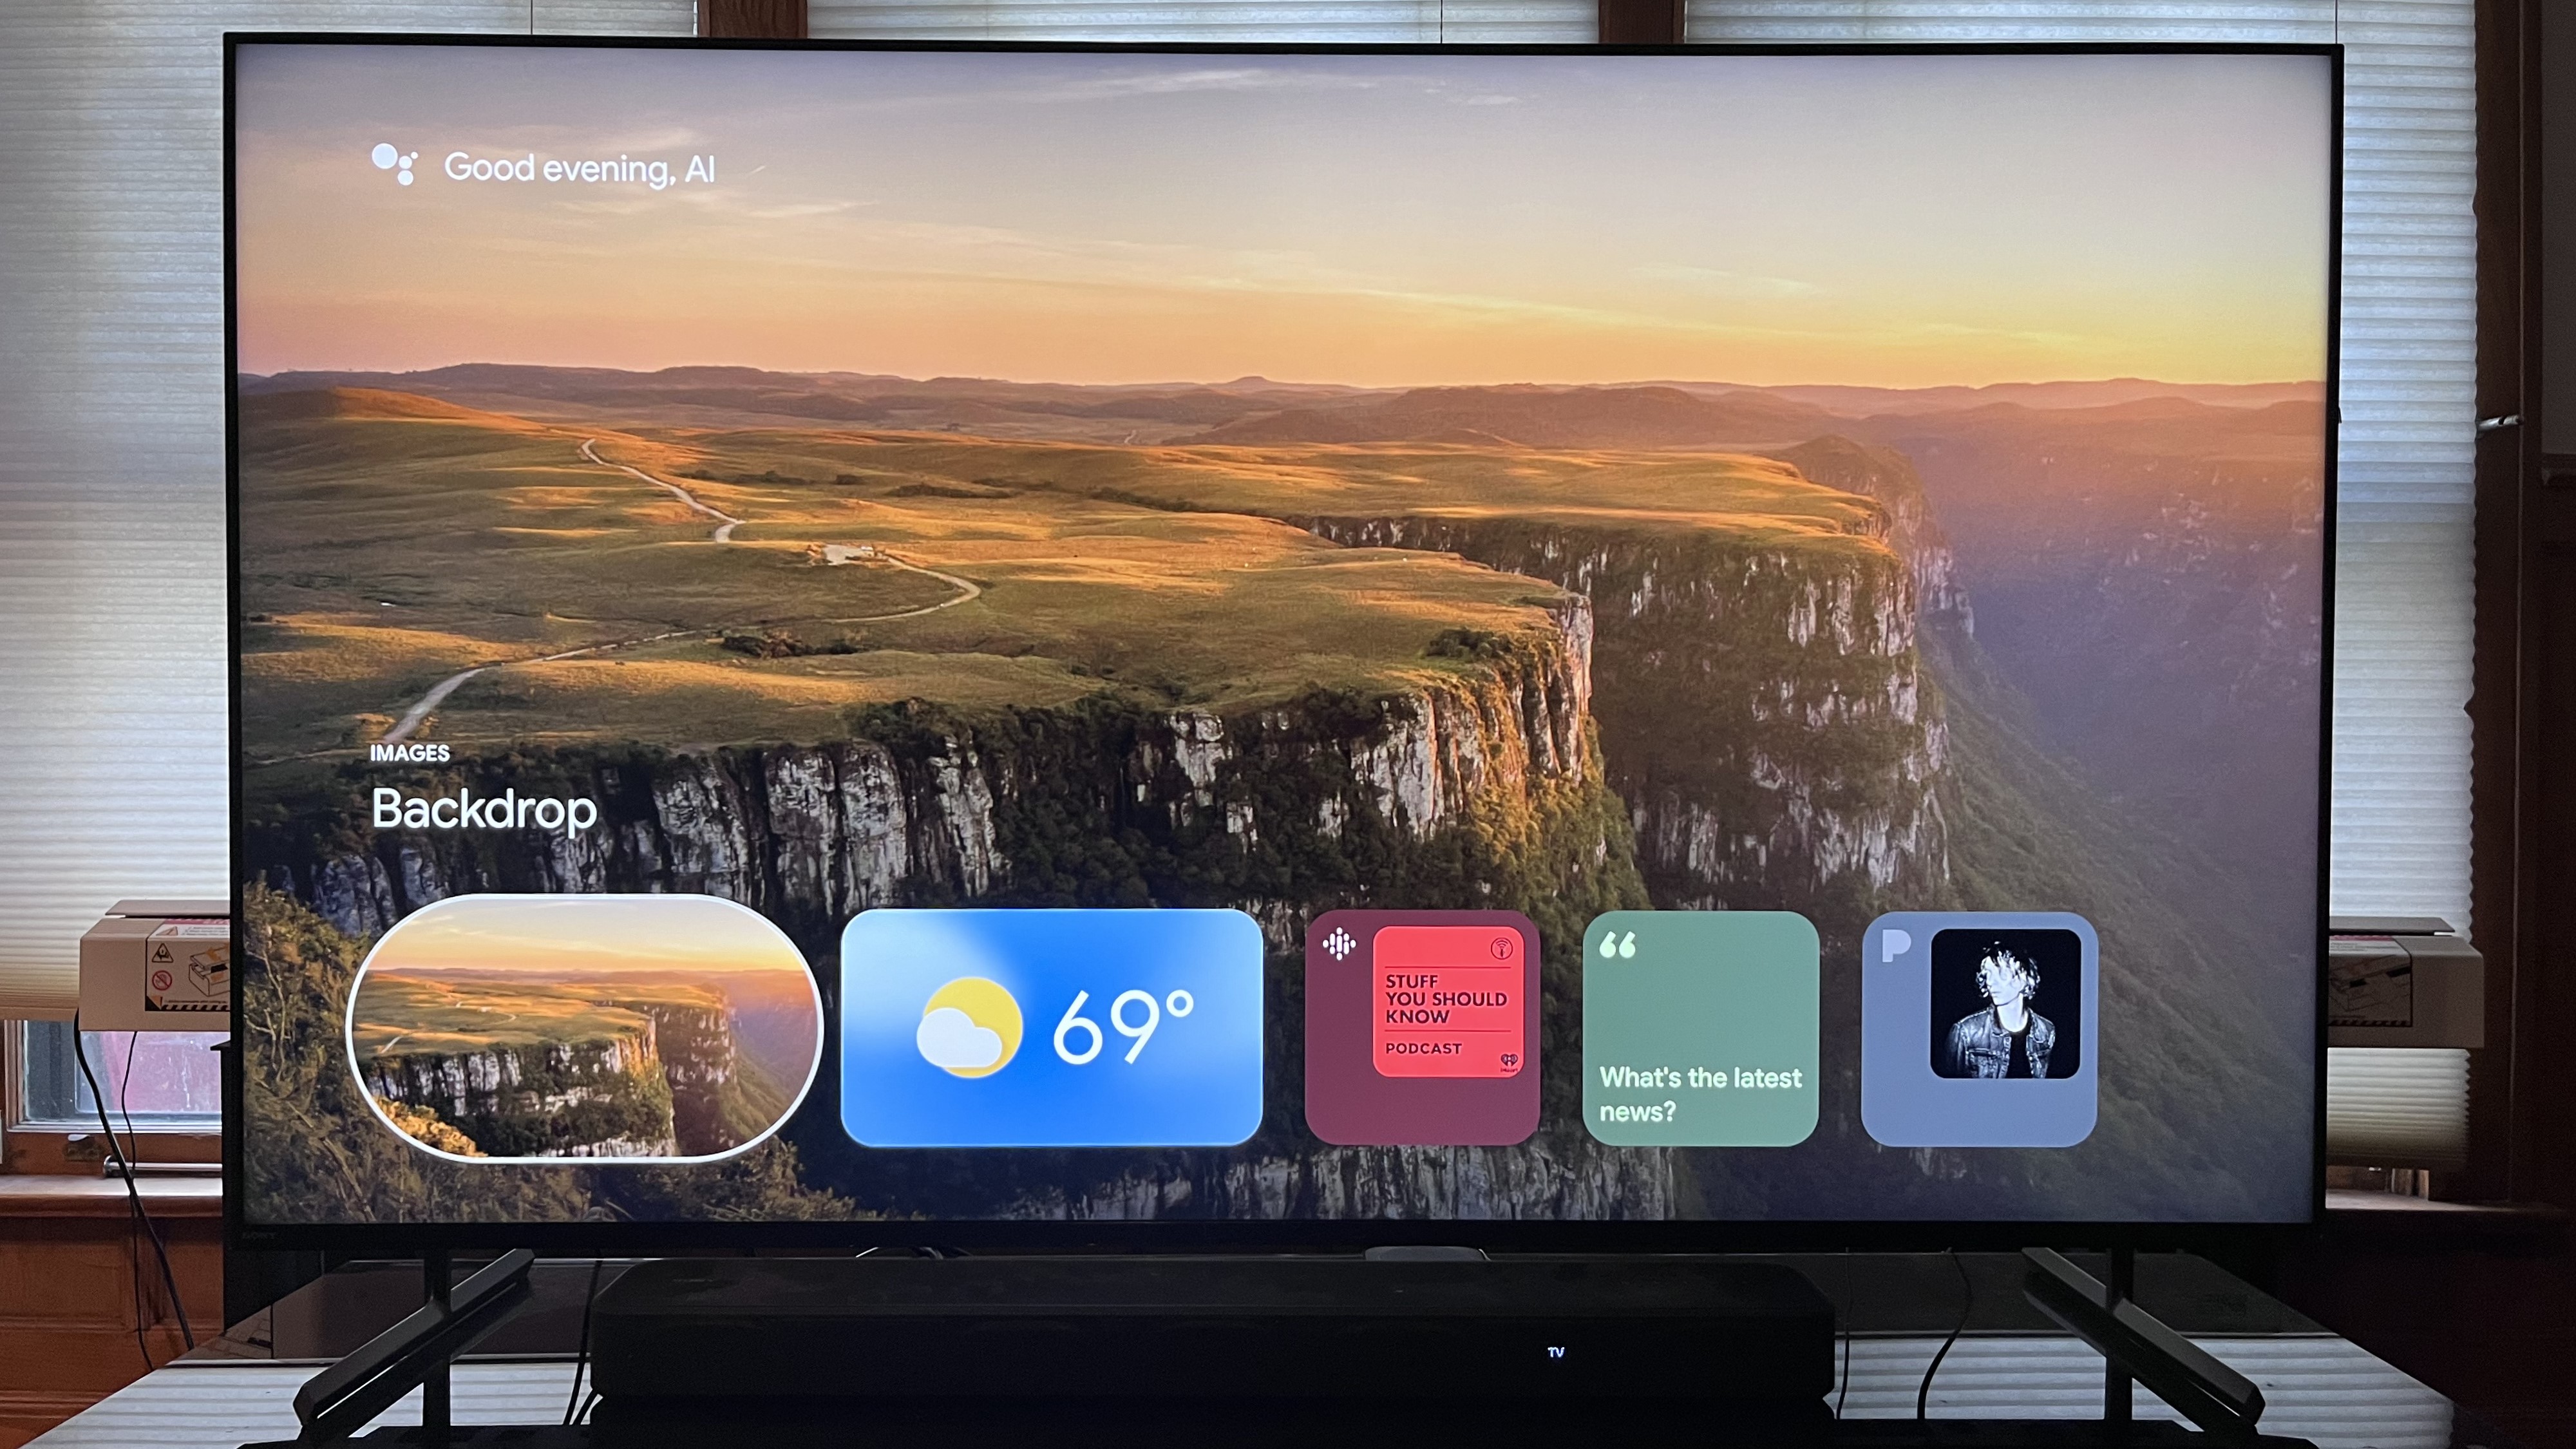 Sony X90L TV in Google TV ambient mode